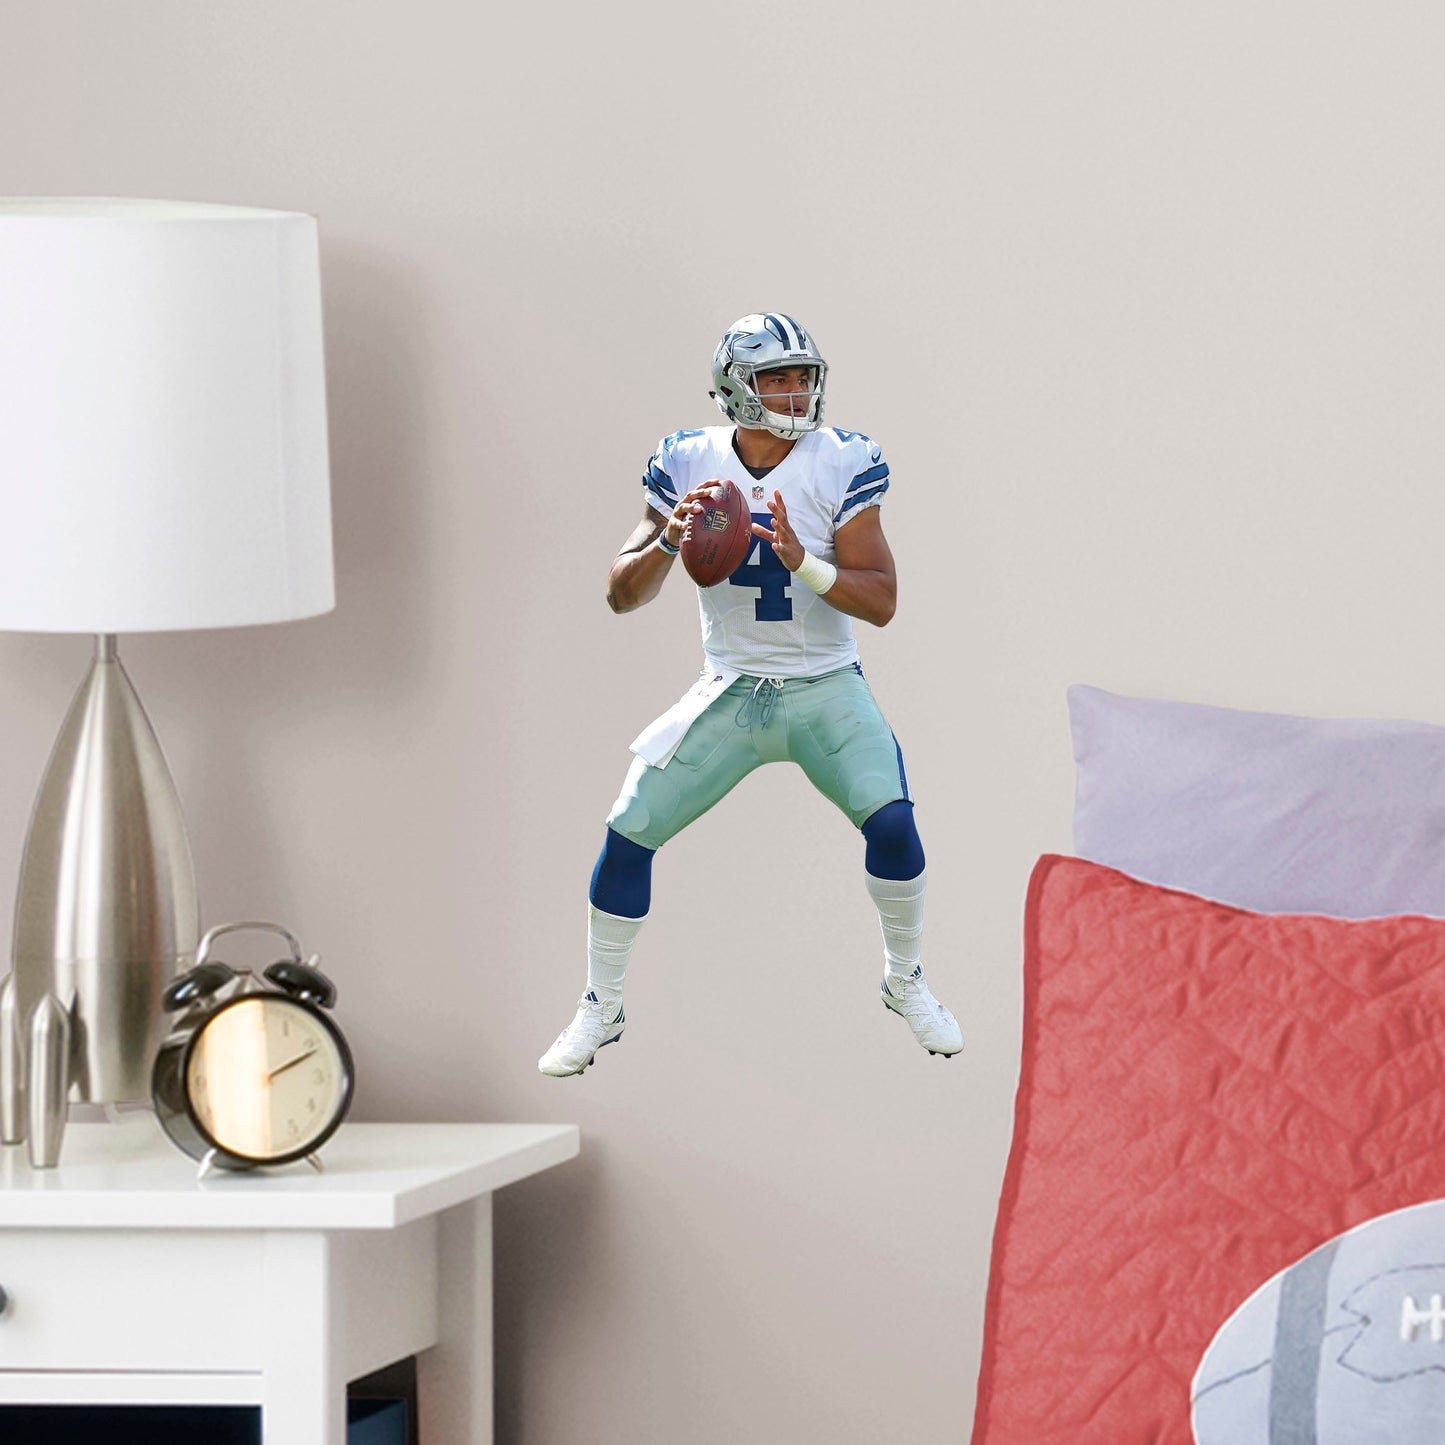 Large Athlete + 2 Decals (9"W x 16"H) Make 4 your personal lucky number and remind yourself that anything is possible with a high-quality, life-sized Dak Prescott vinyl decal. Turn your favorite room, man cave, or playroom into Cowboys Stadium, complete with Prescott getting ready to throw for the touchdown. Count on this durable decal to be just as tough as your favorite quarterback - it's designed to be easily removed and reused over and over again.